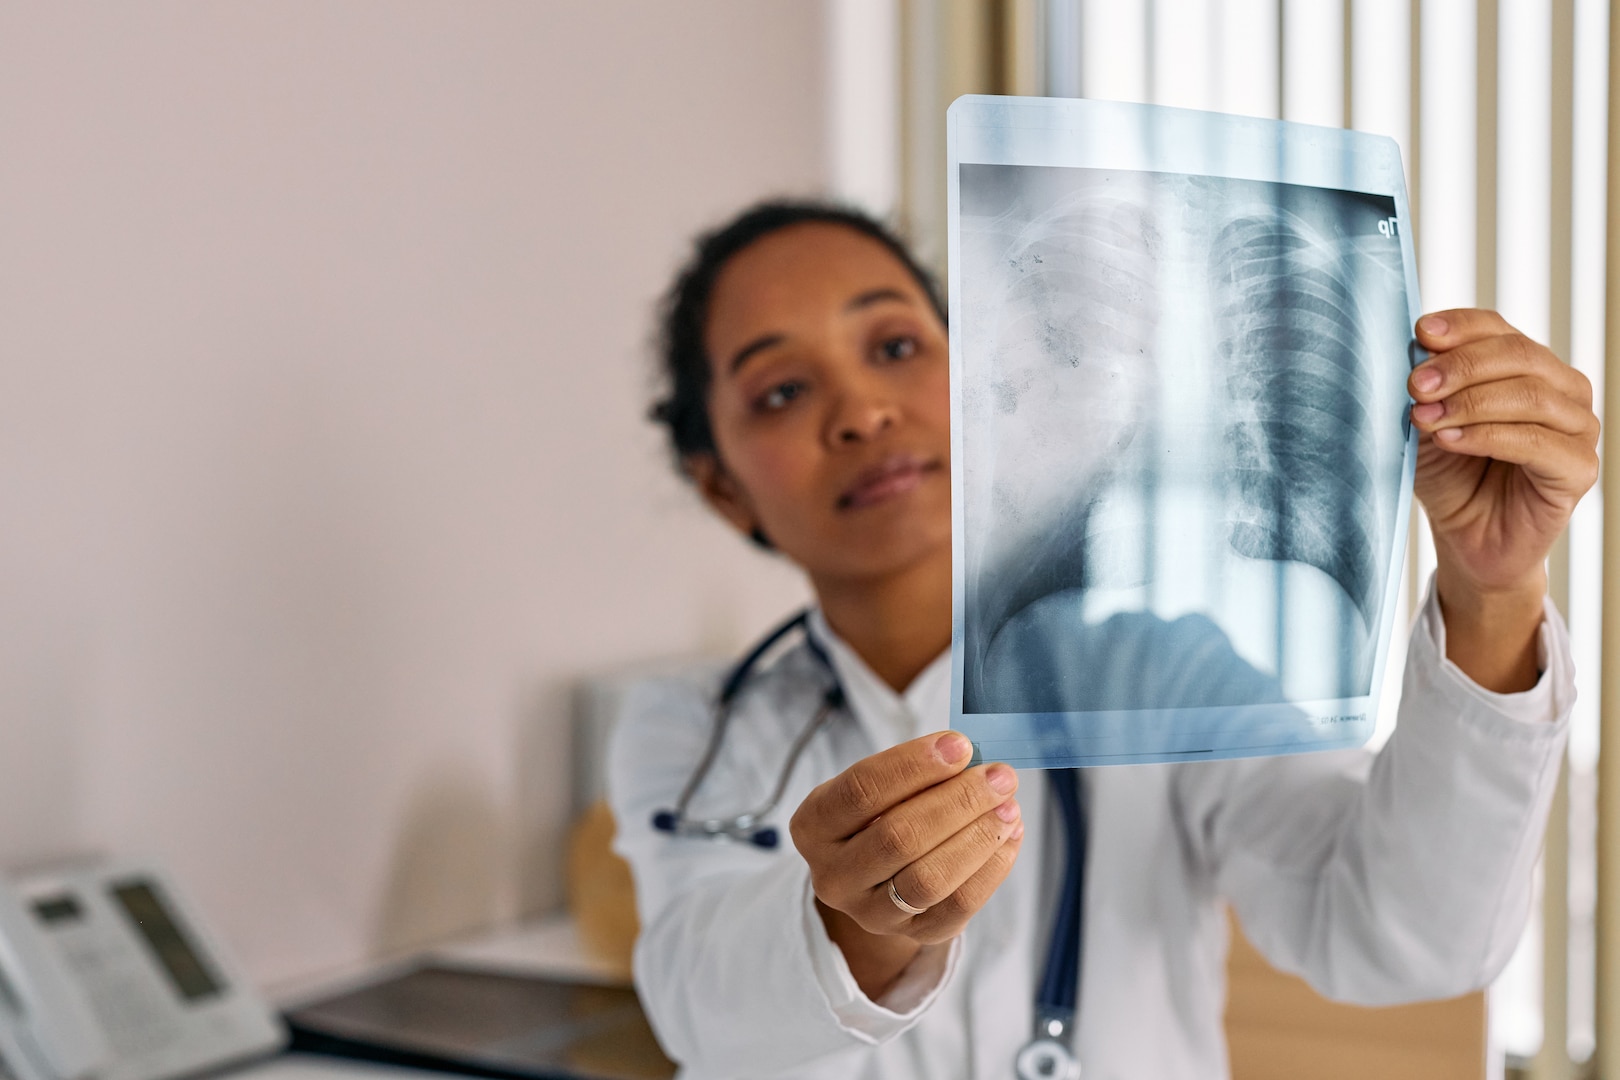 Doctor looks at X-ray